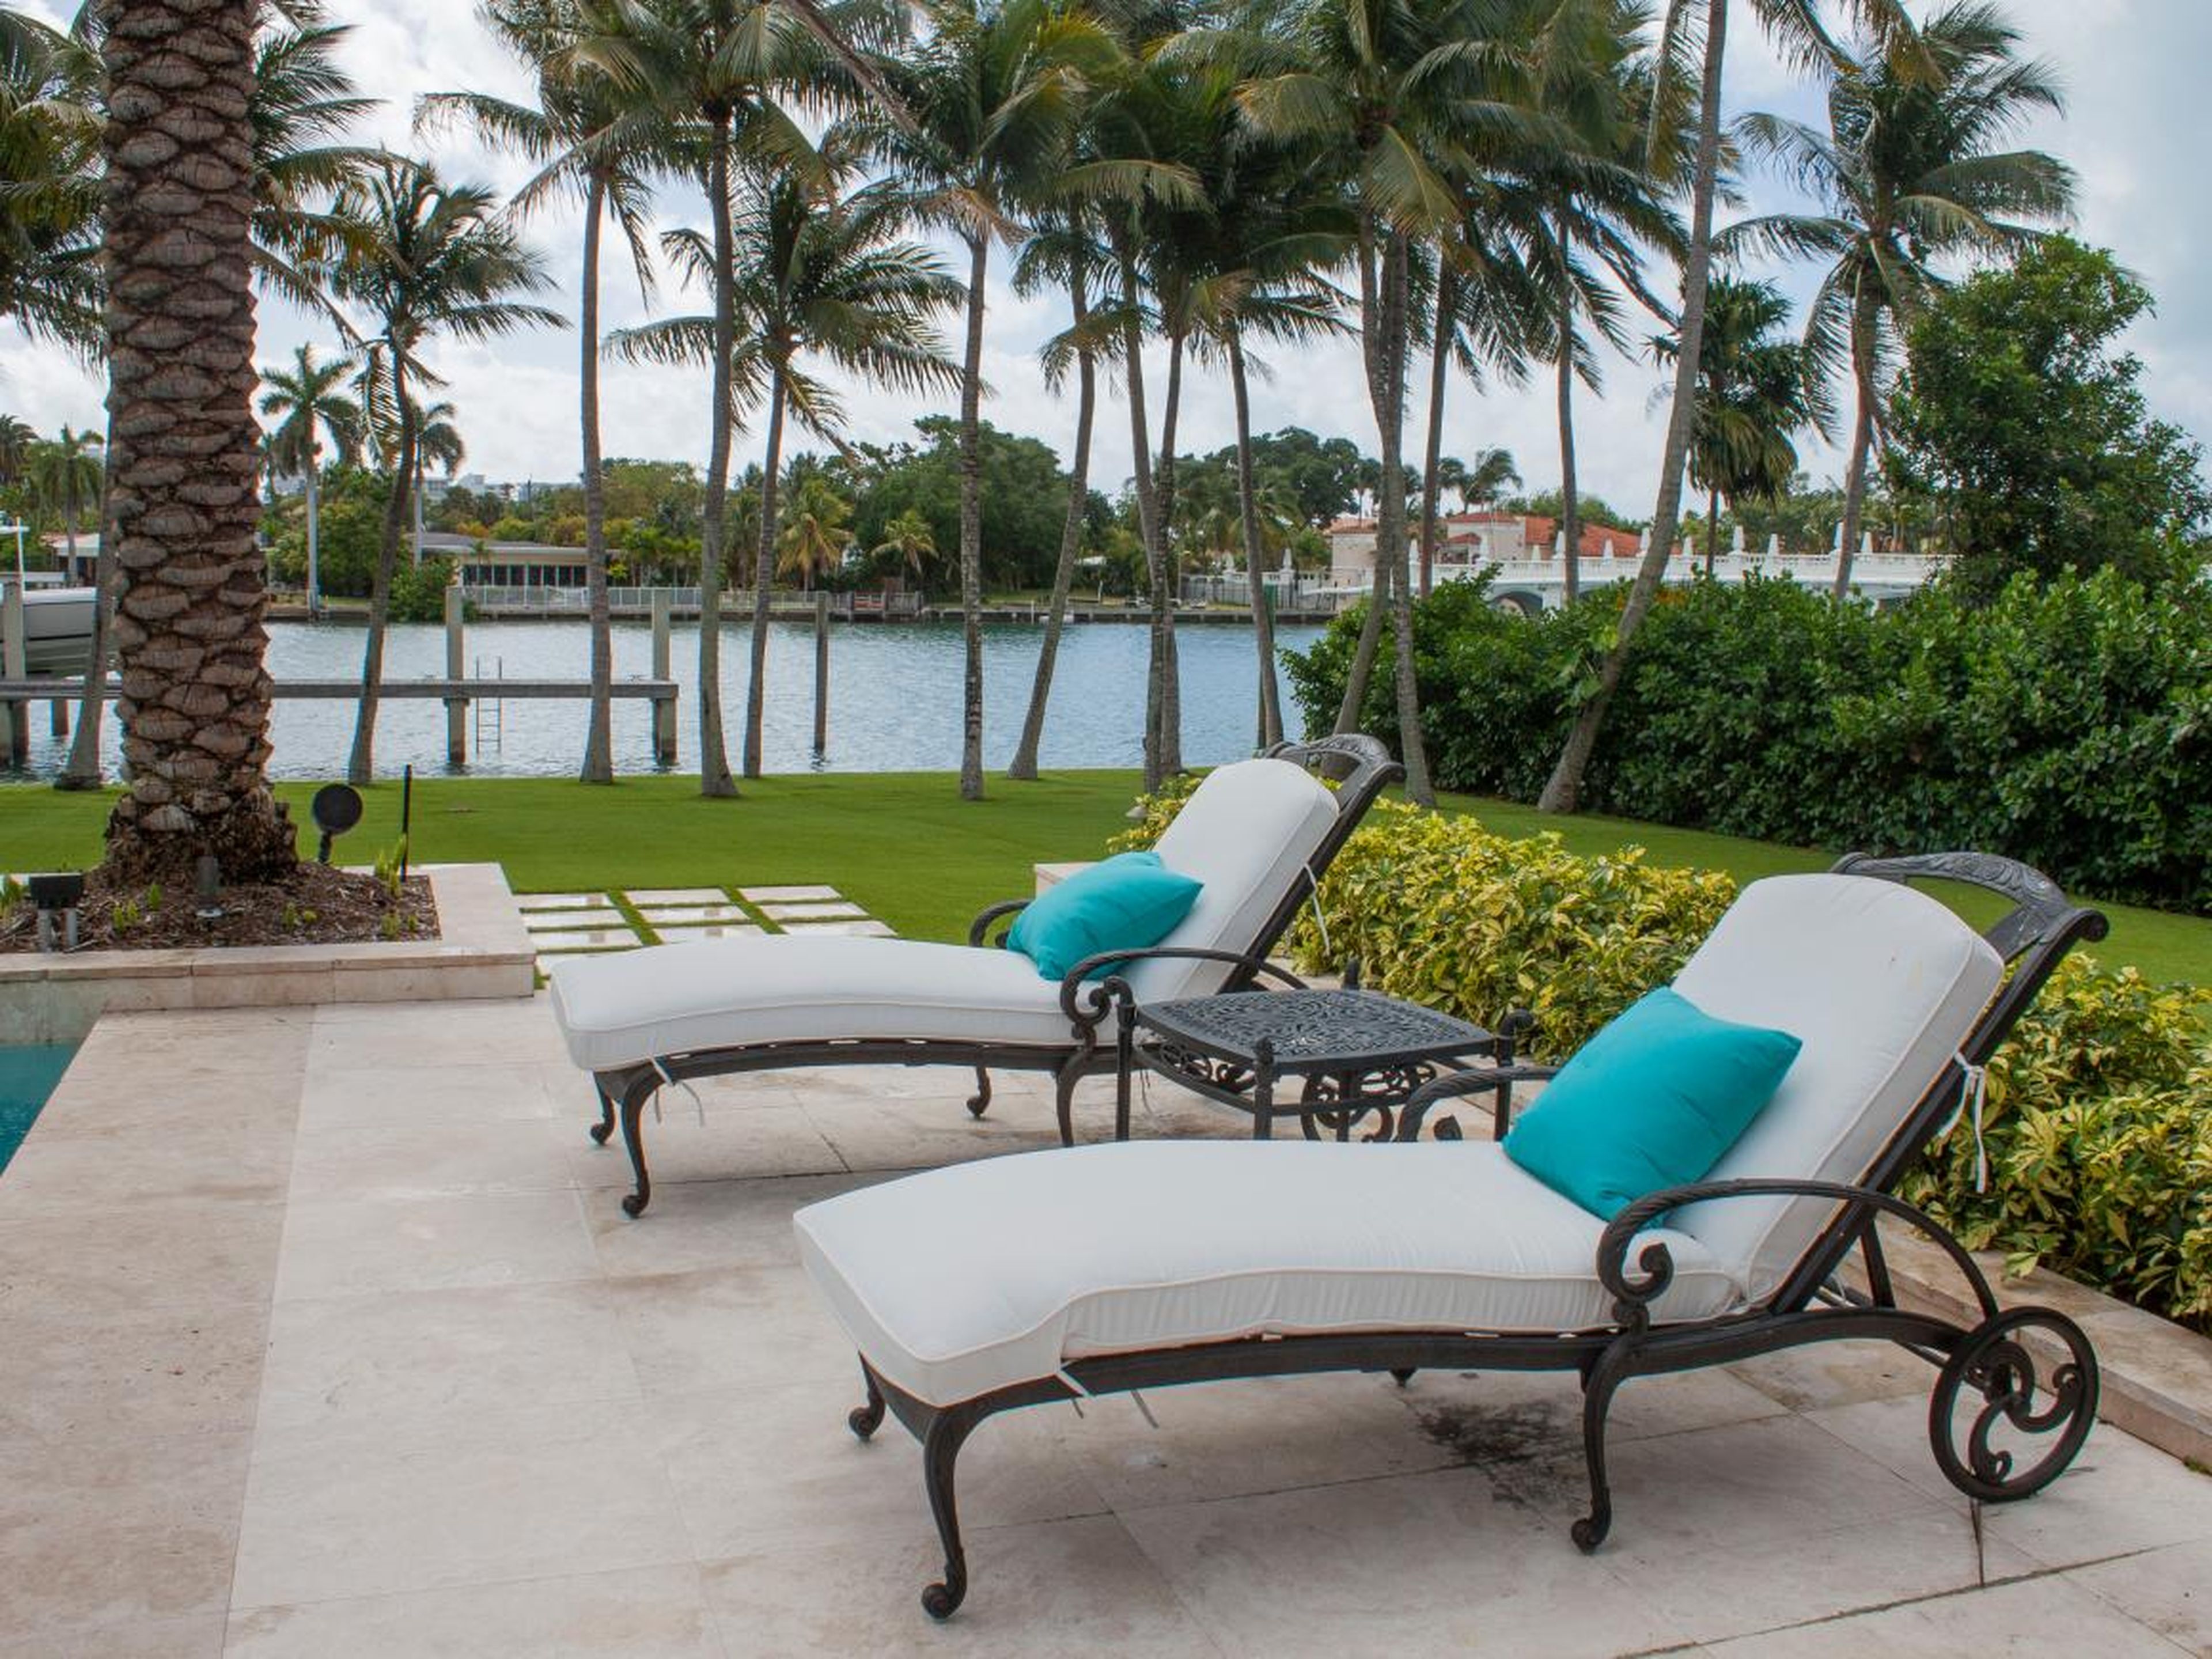 Several lounge chairs are scattered throughout the pool area.